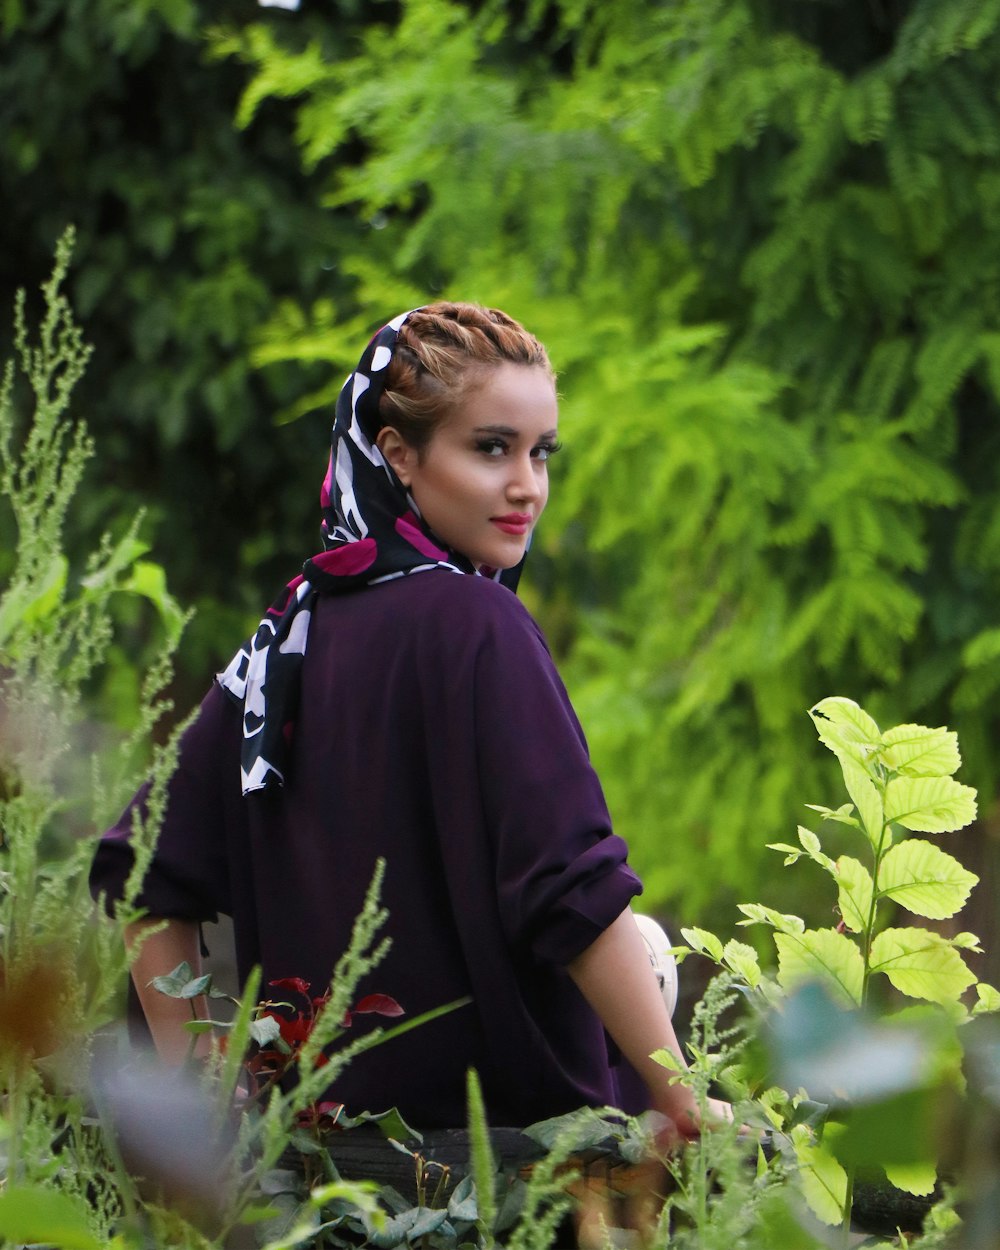 woman in black and pink hijab standing near green plants during daytime